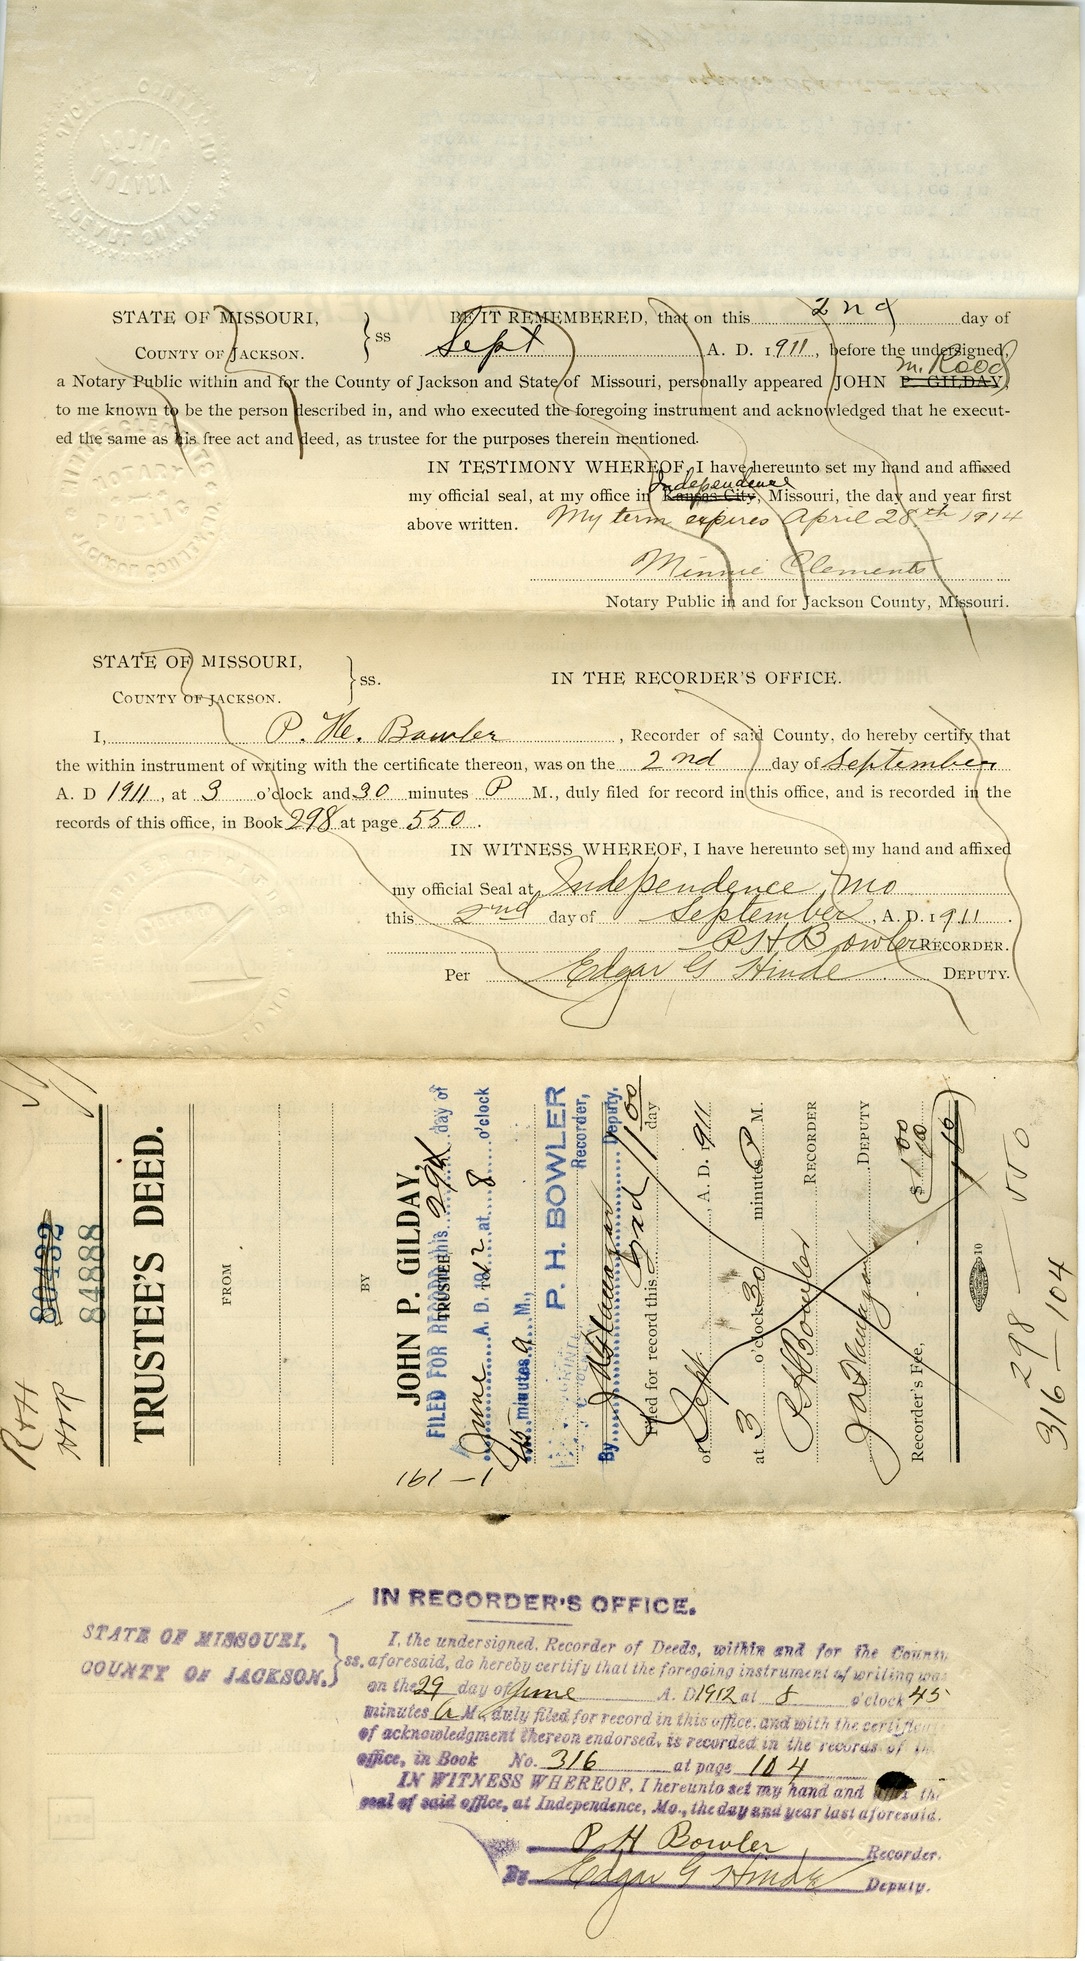 Trustees Deed from Mary L. McMillin and John H. McMillin to Samuel H. Chiles